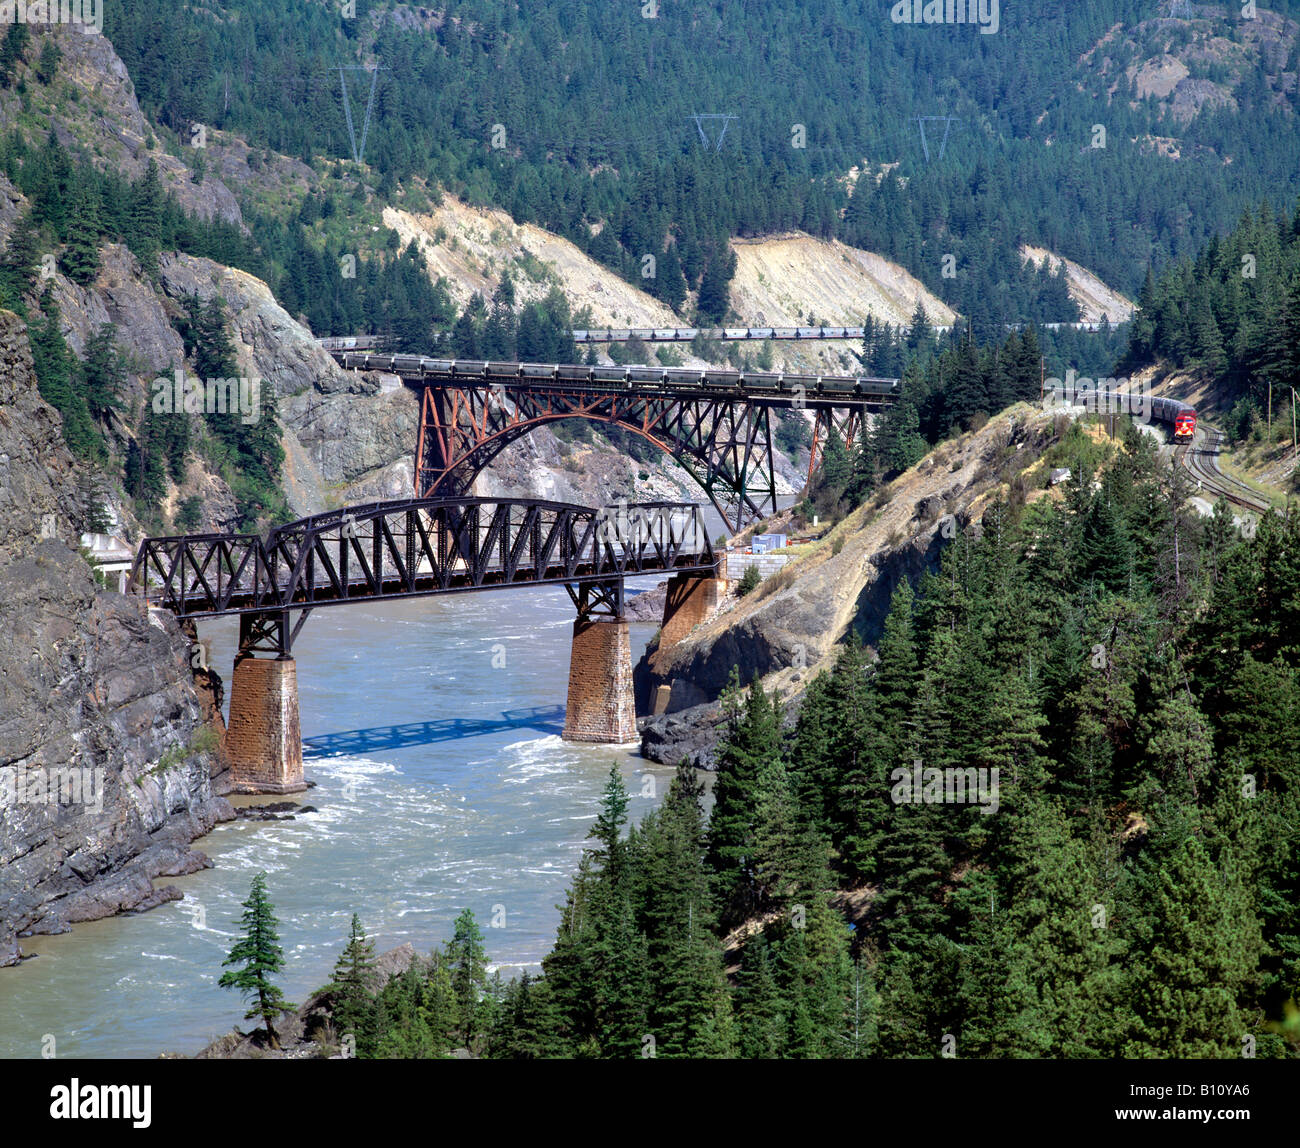 A Canadian Pacific freight train crossing the Fraser River near Lytton, British Columbia, Canada. Stock Photo